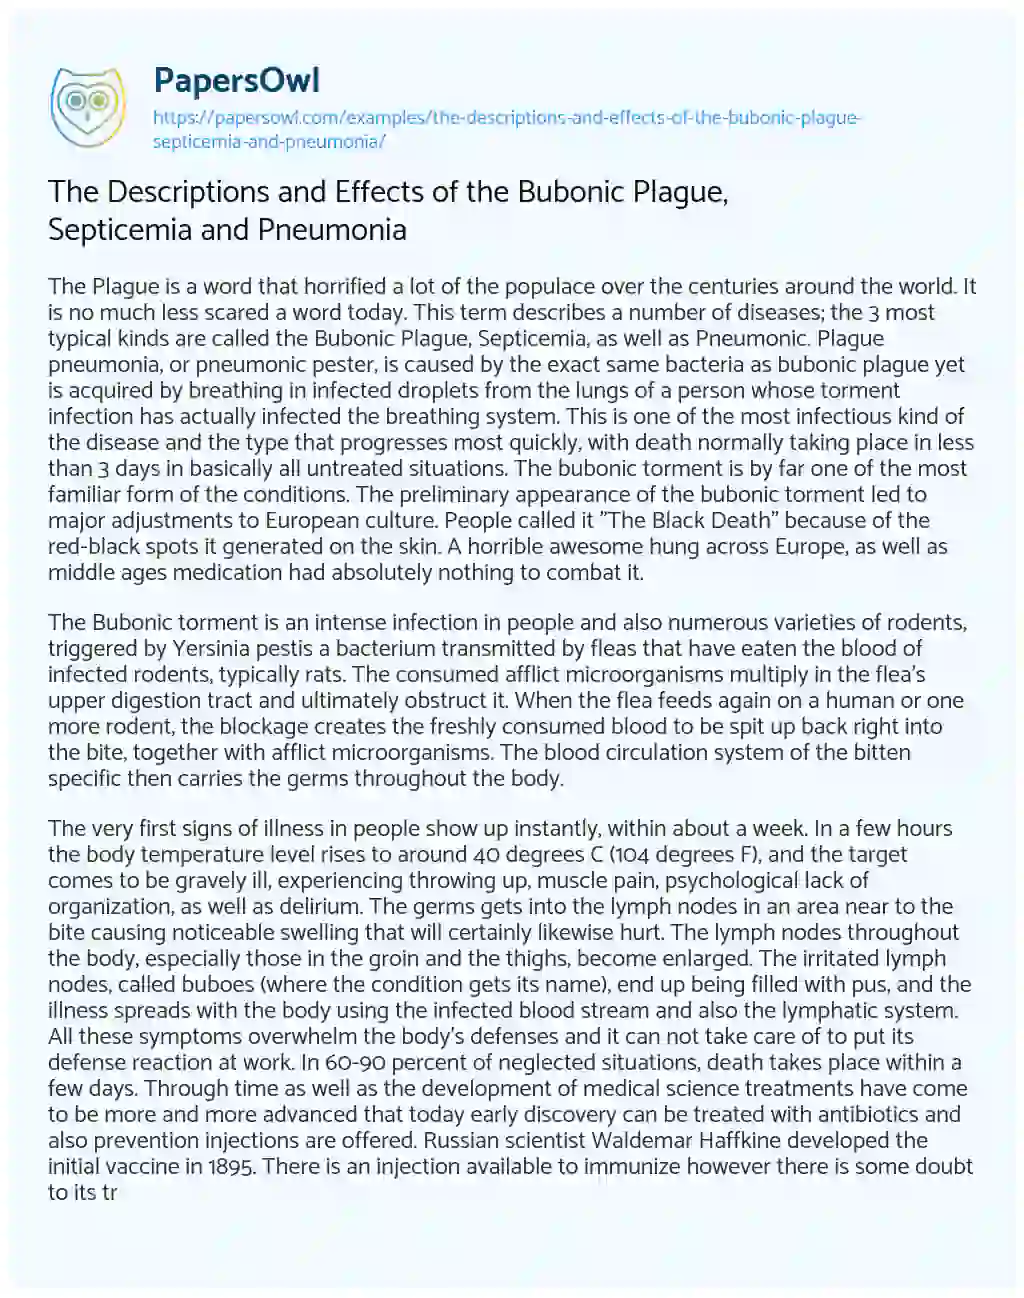 The Descriptions and Effects of the Bubonic Plague, Septicemia and Pneumonia essay